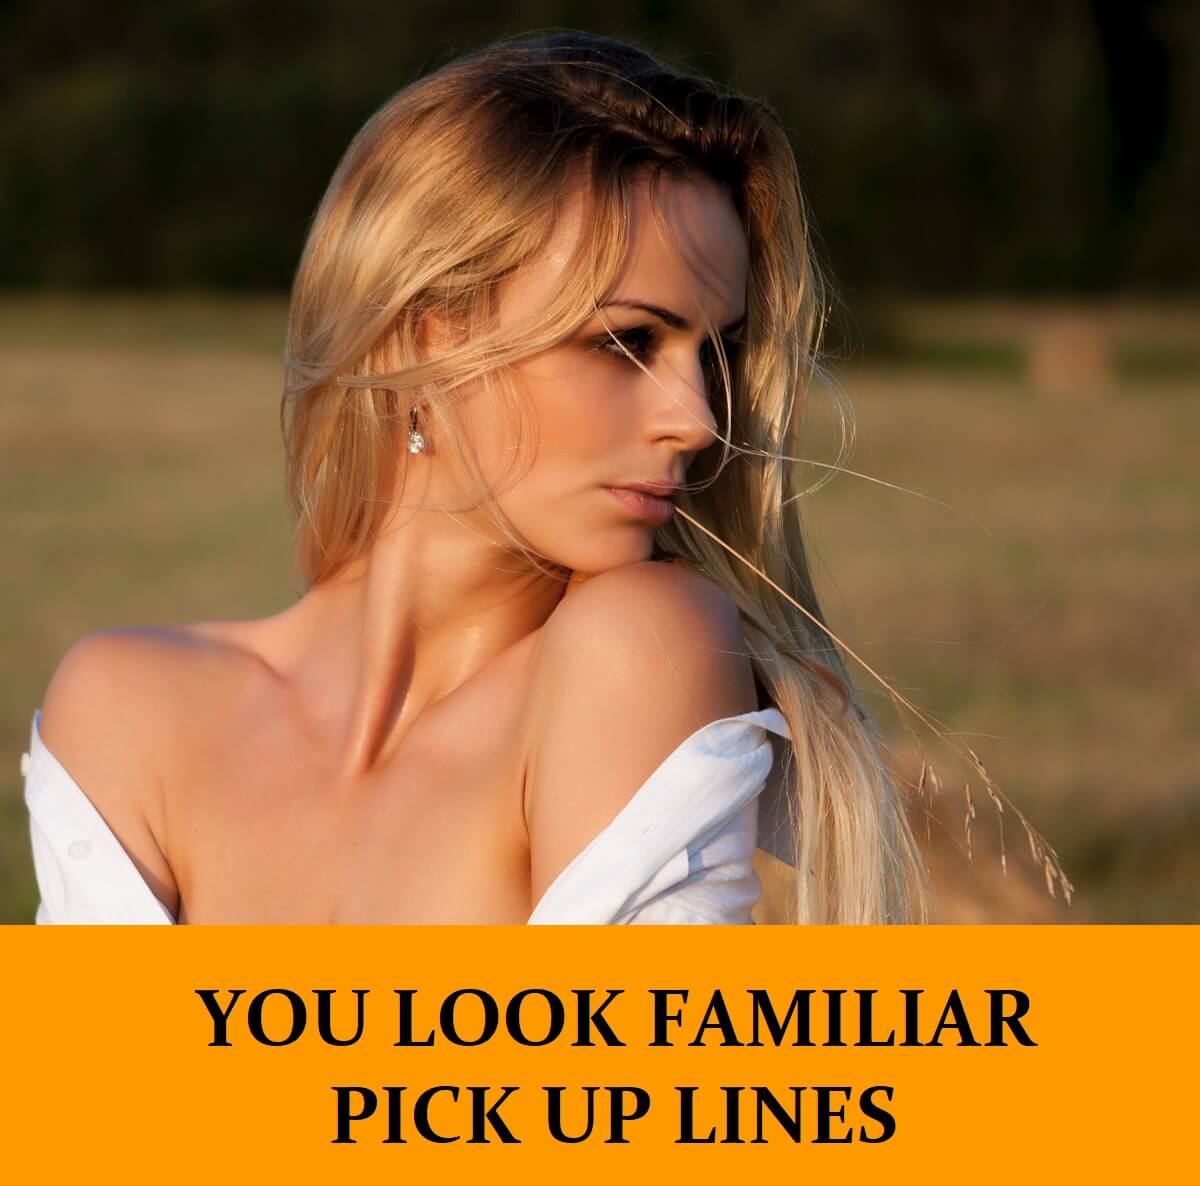 30 You Look Familiar Pick Up Lines Funny Dirty Cheesy